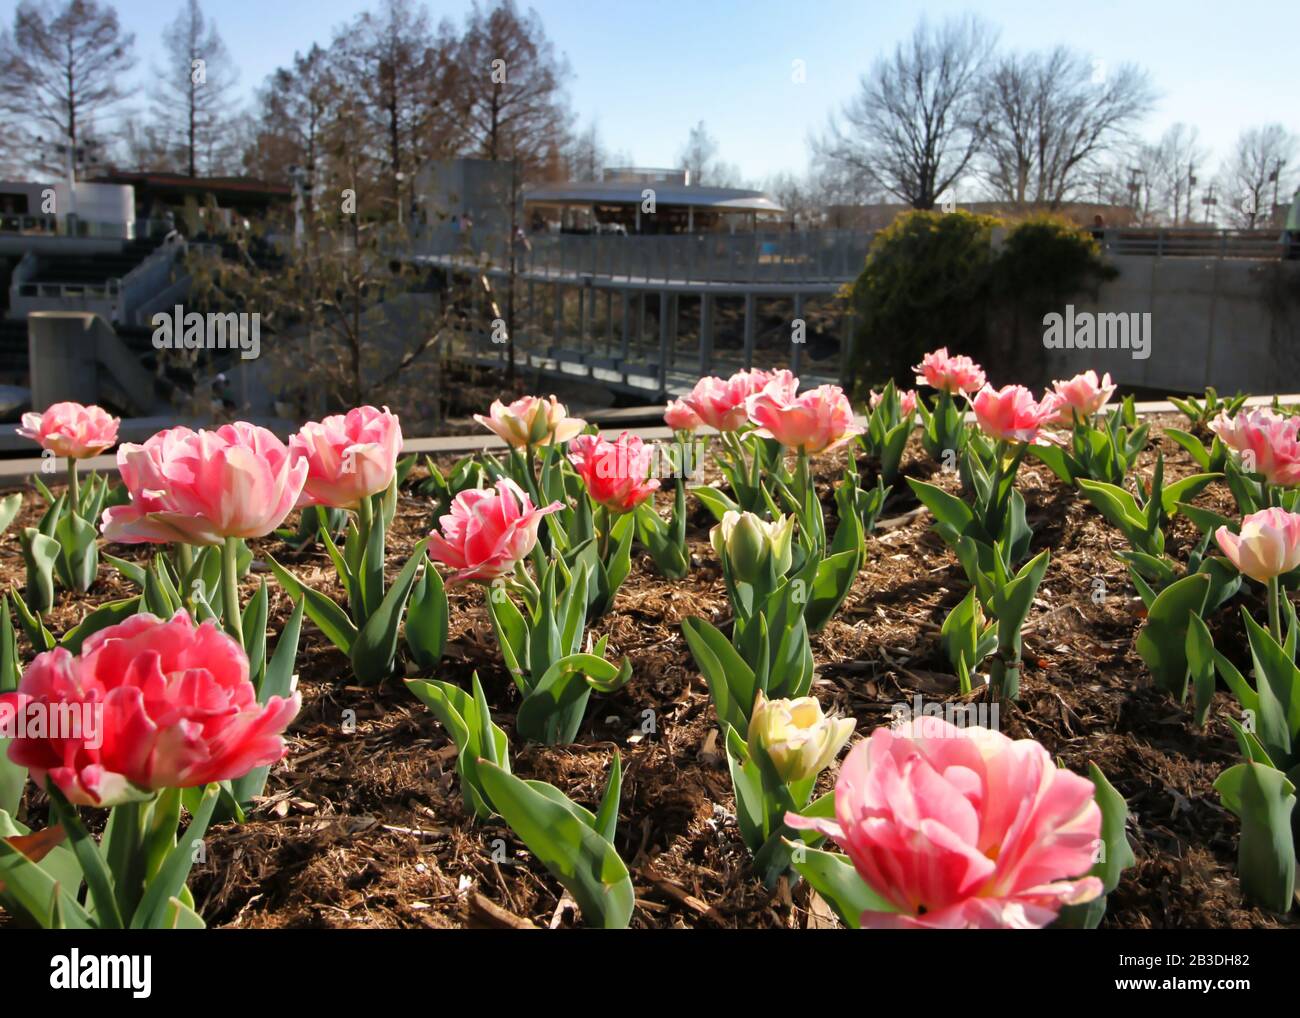 A bed of pink tulips is seen in a close up view with the Myriad Gardens in the background. Stock Photo